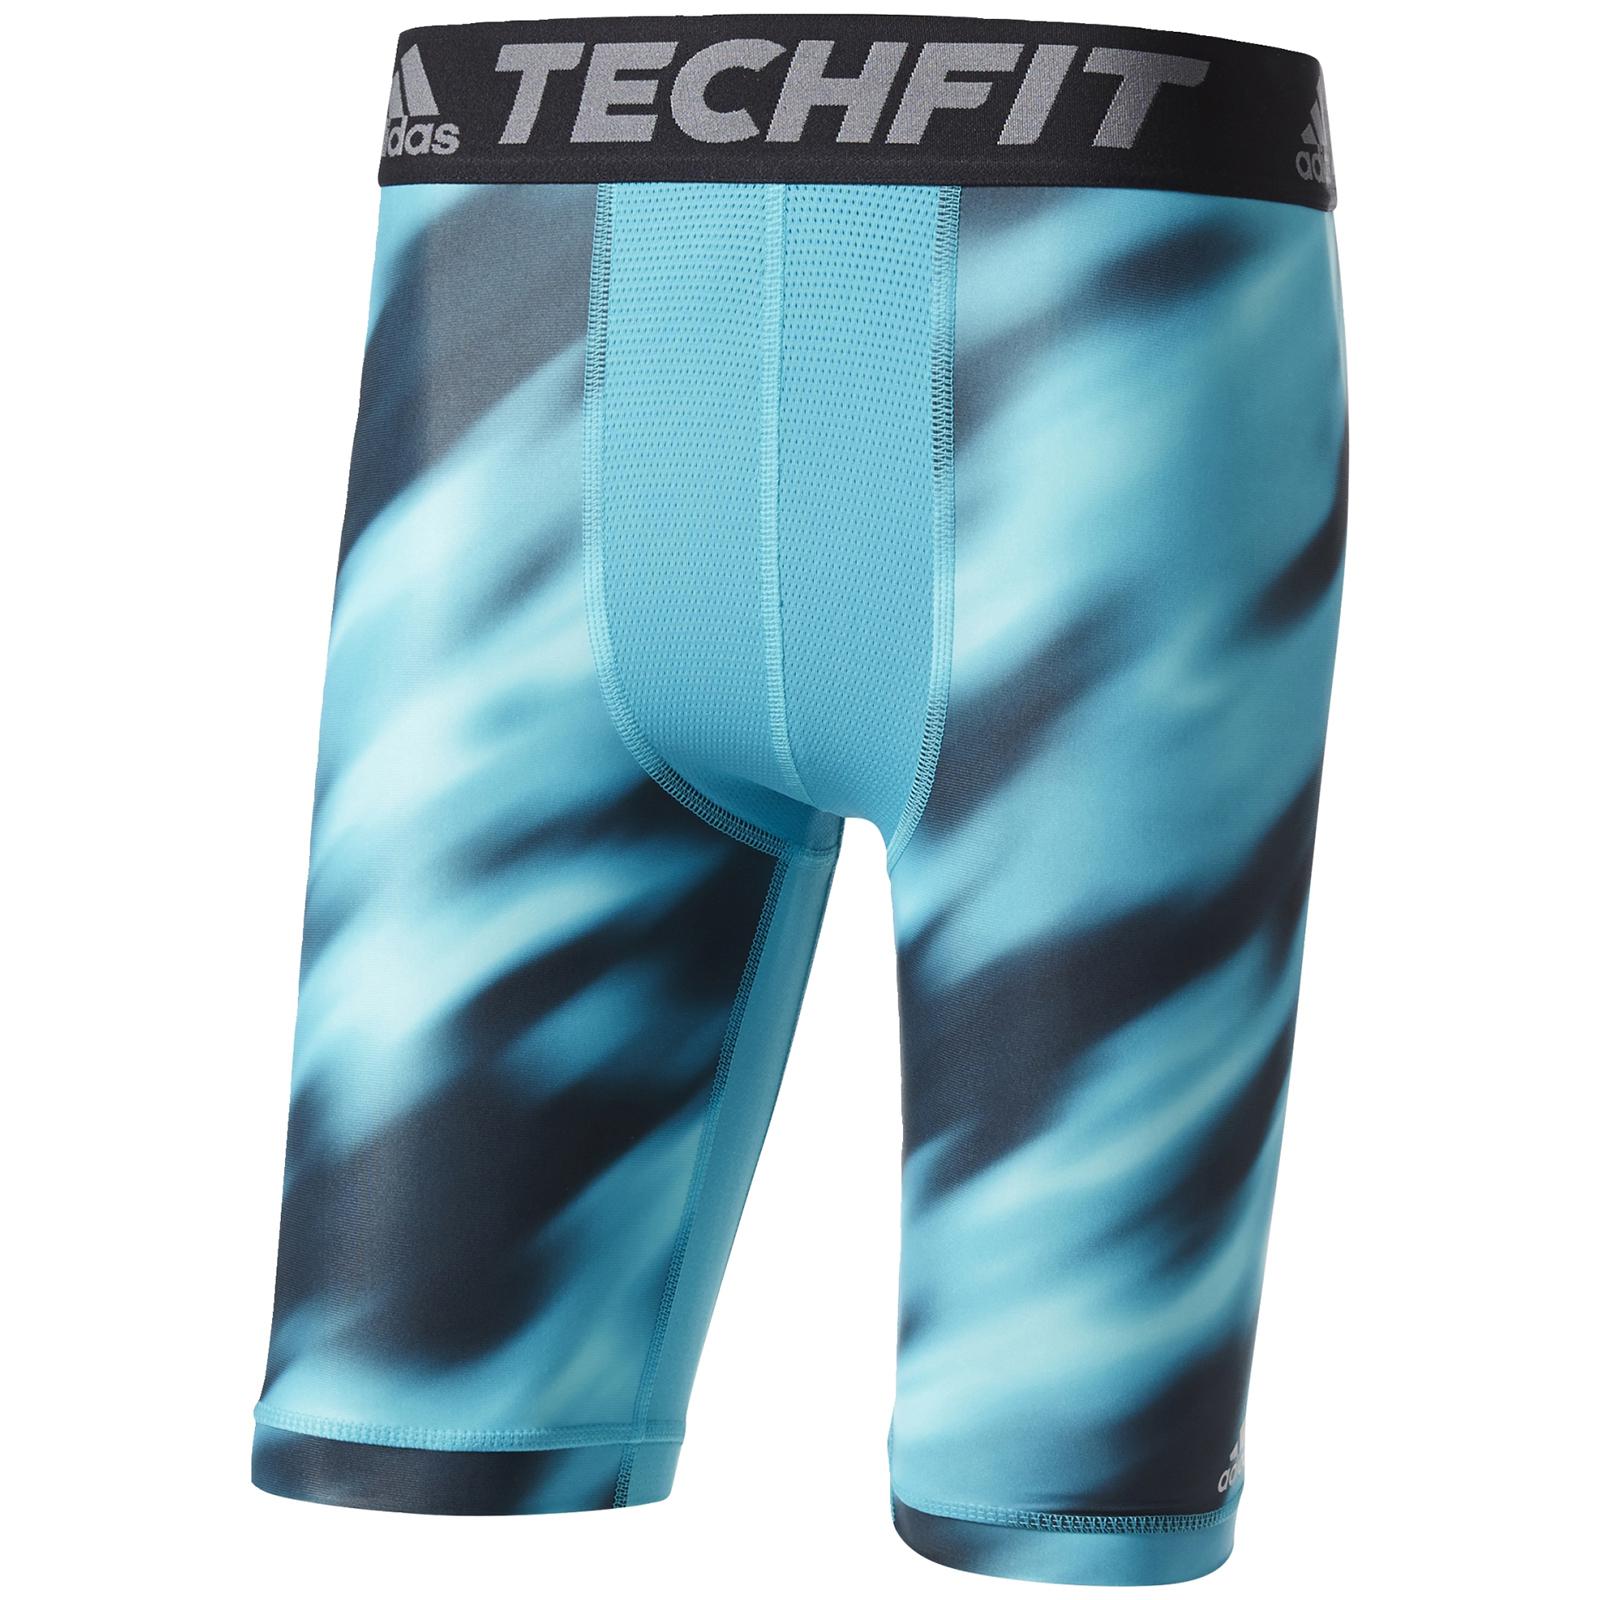 adidas Techfit Climachill 9"" Compression Shorts in Blue for Men - Lyst